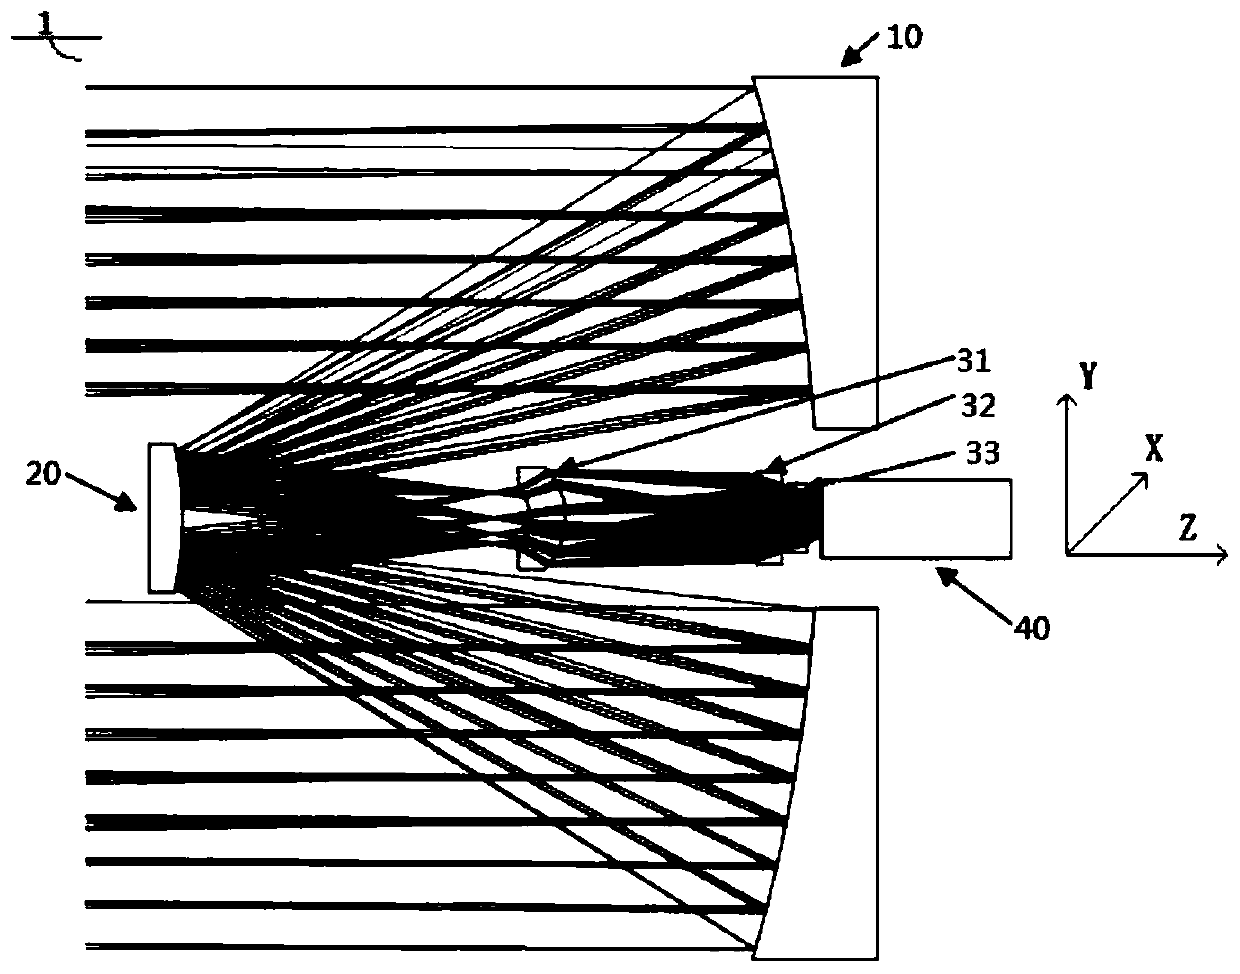 Compact-type catadioptric-type optical system